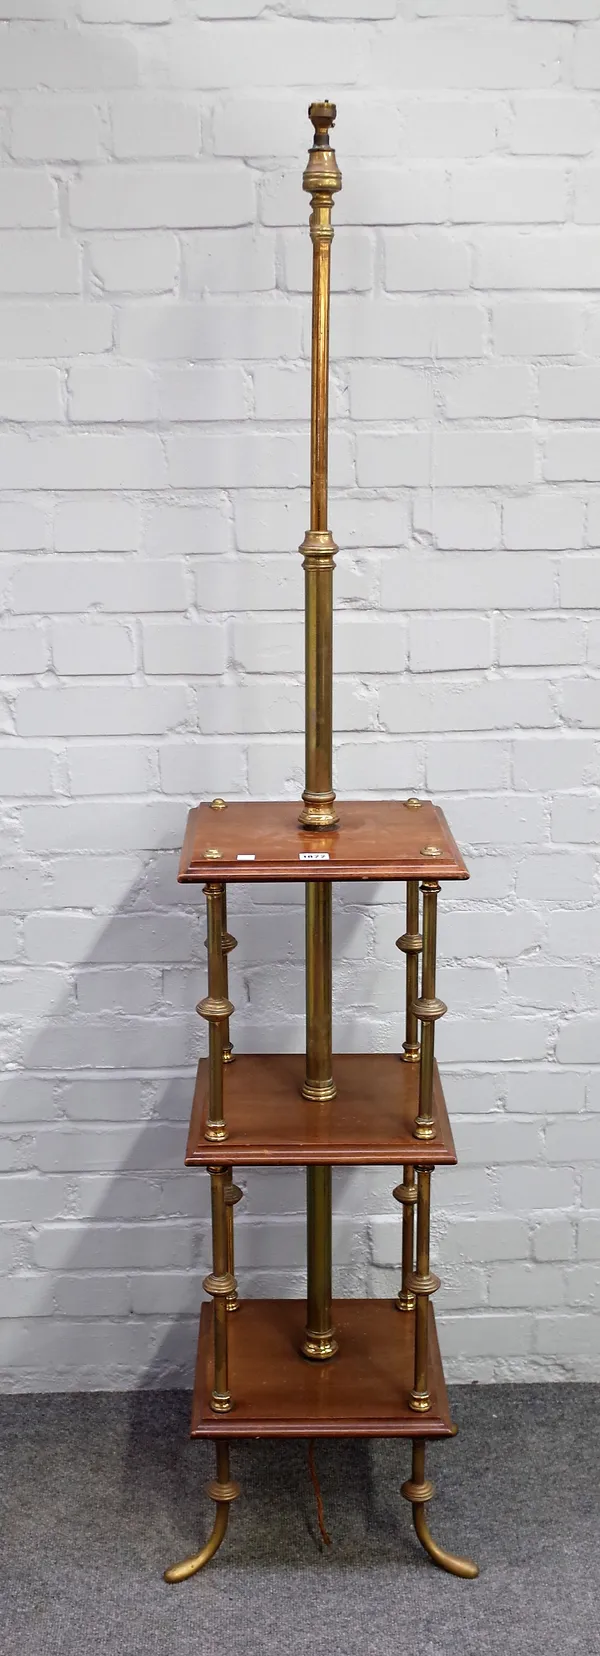 An early 20th century mahogany and brass three tier whatnot with integral standard lamp, 32cm wide.